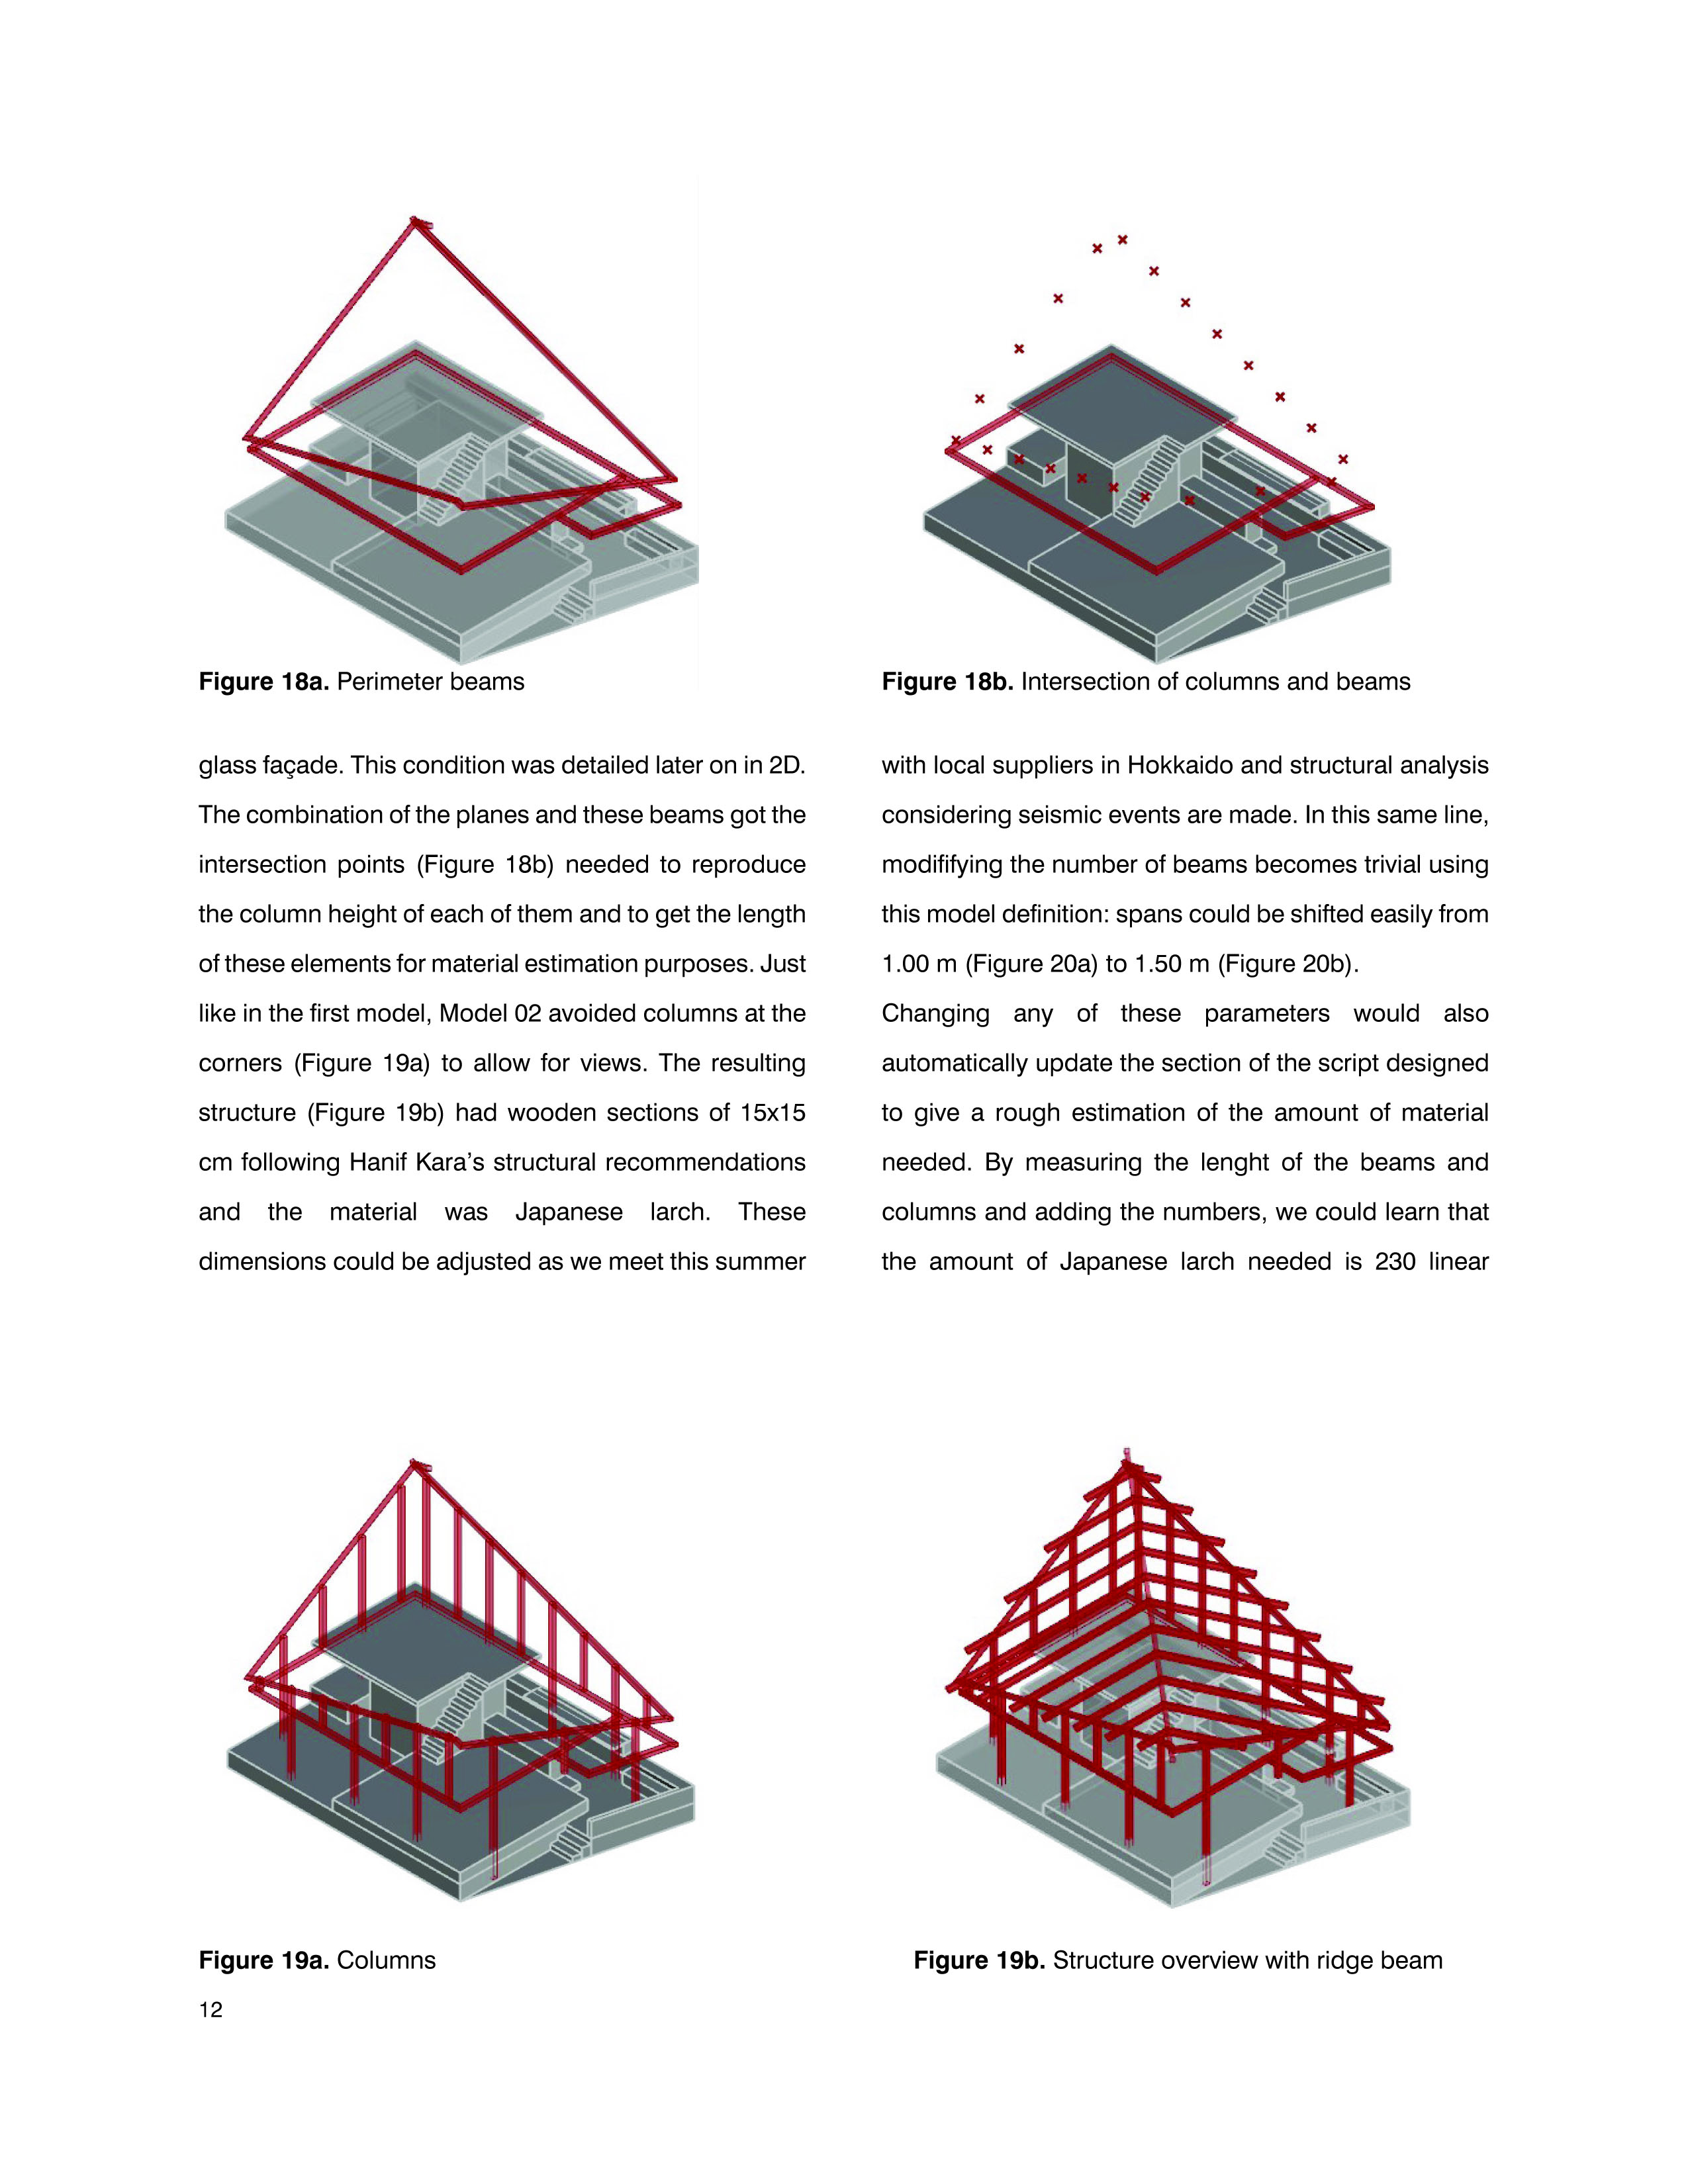 Applications of parametric design tools in Horizon House_Ana Garcia Puyol-Page12